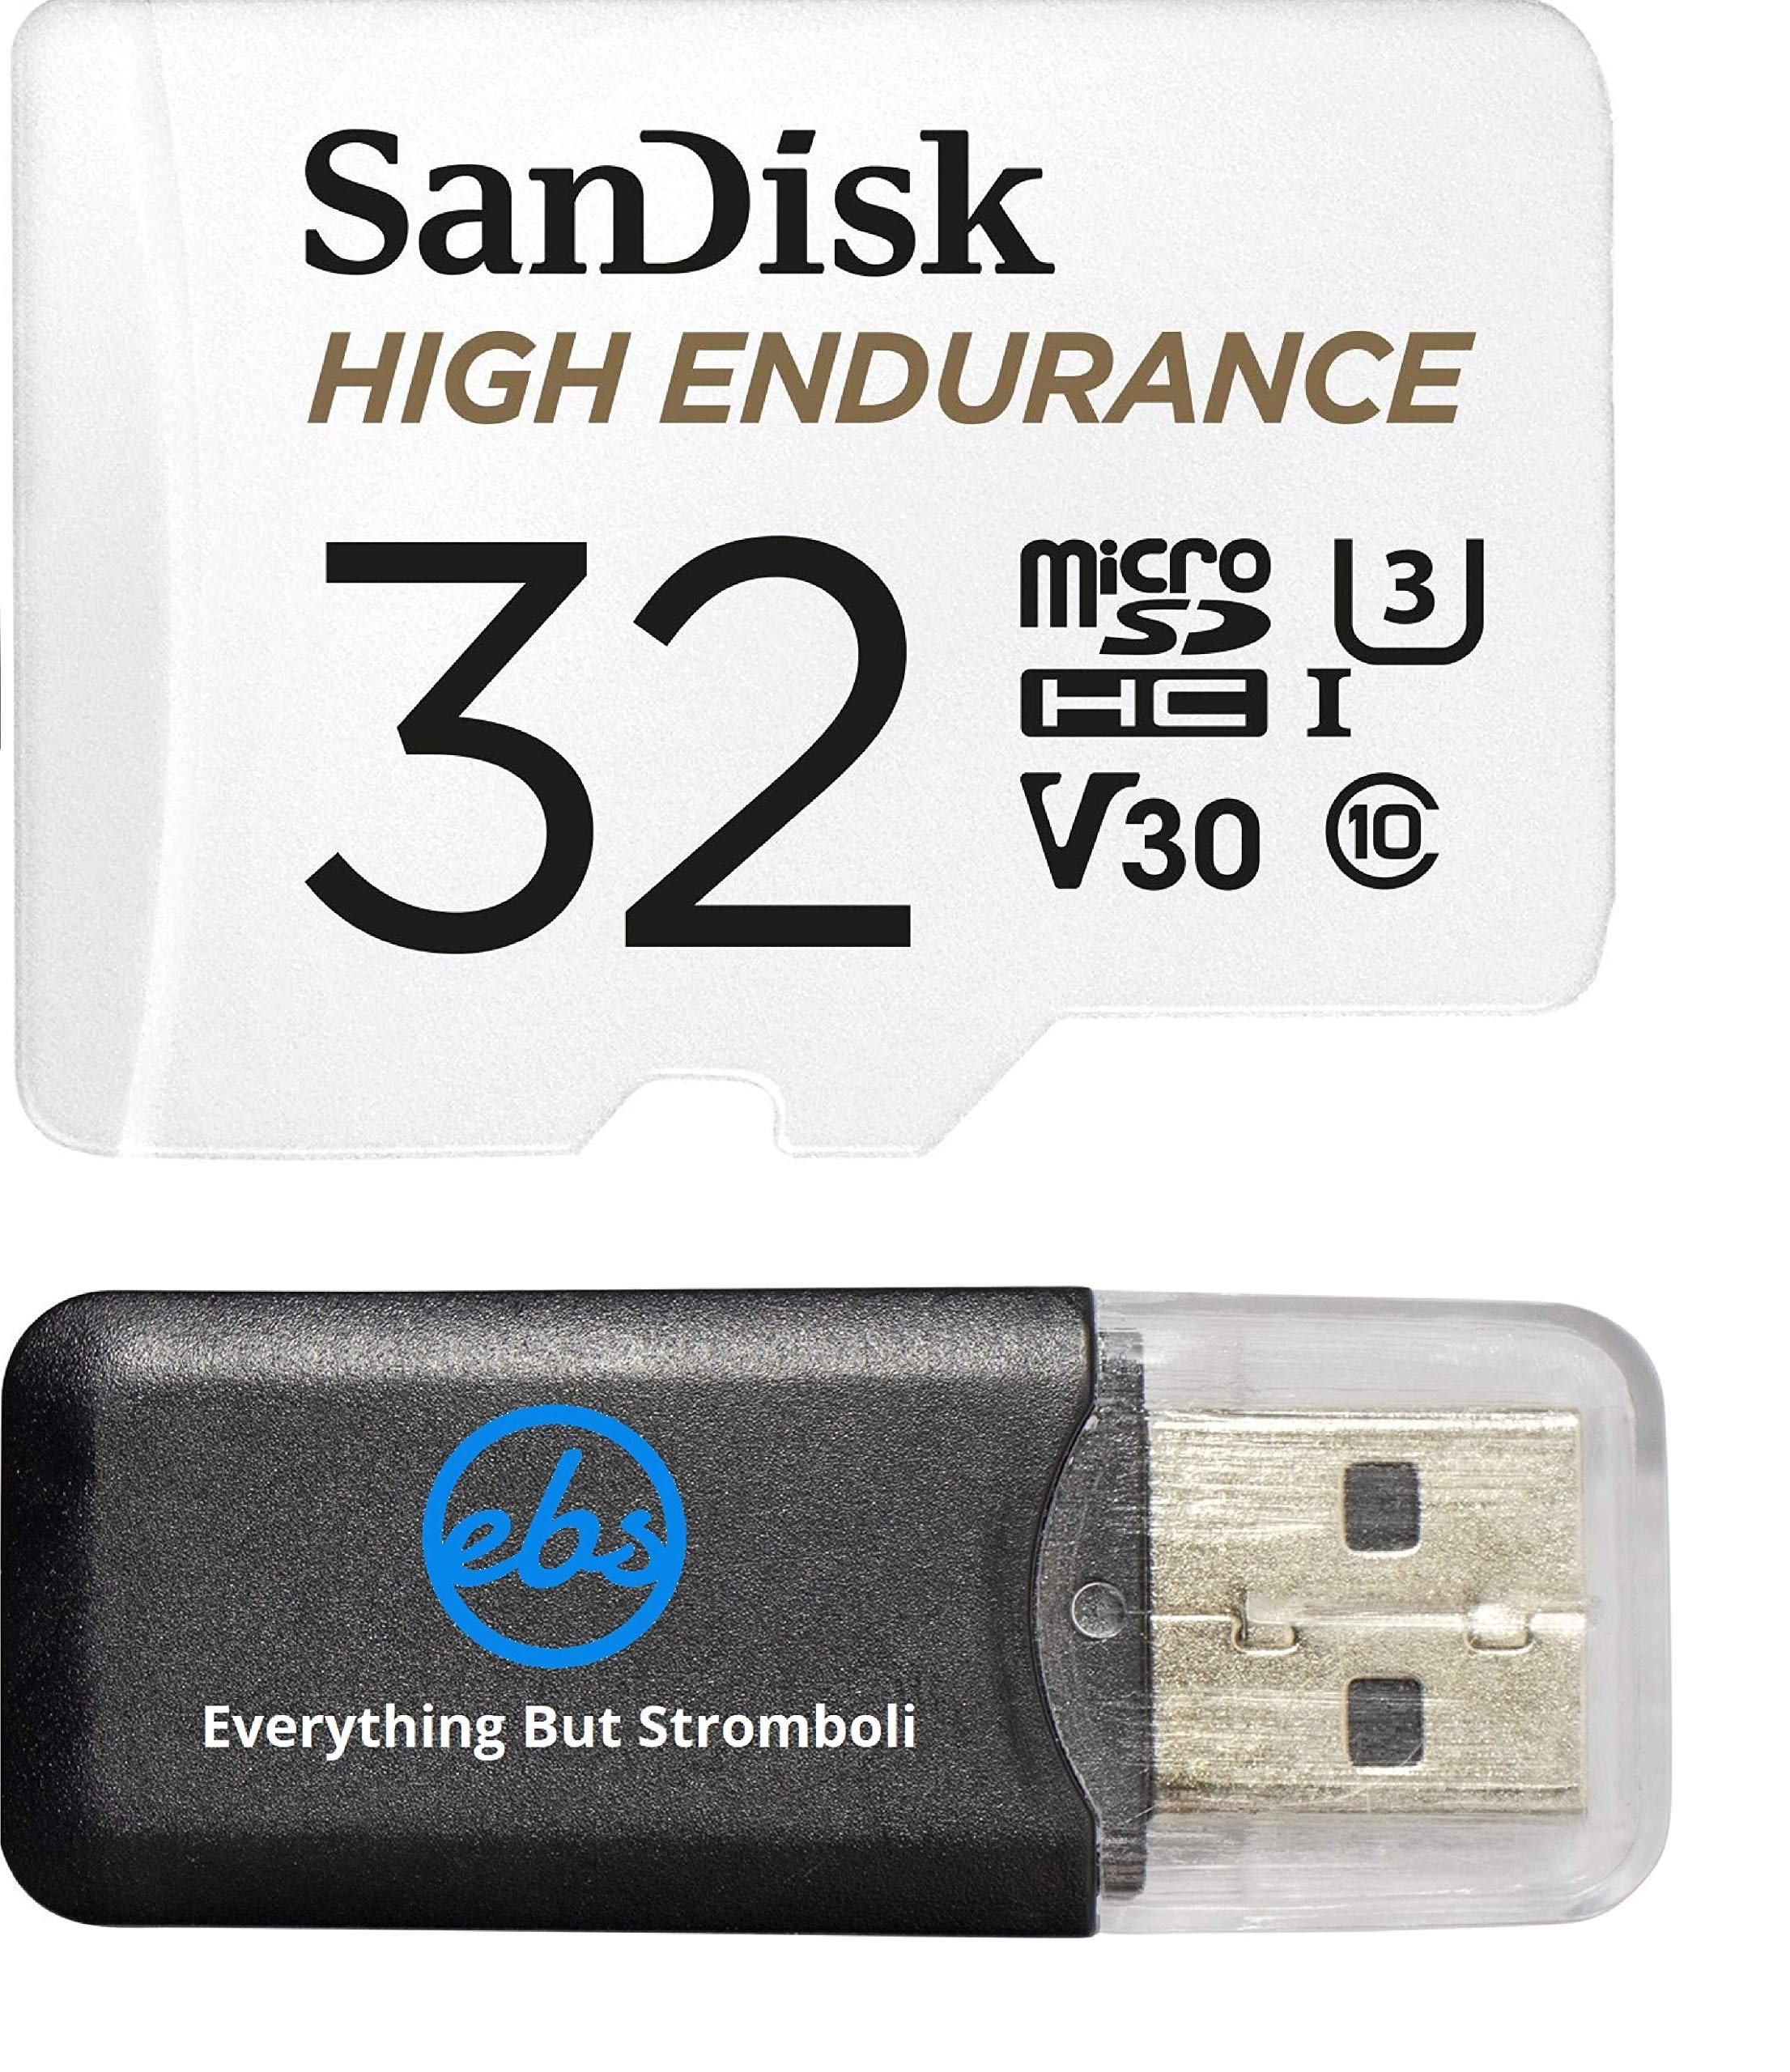 Book Cover SanDisk 32GB High Endurance Video Monitoring Card (SDSDQQ-032G-G46A) Bundle for Dashcam and Surveillance Video with Adapter with (1) Everything but Stromboli (TM) Card Reader